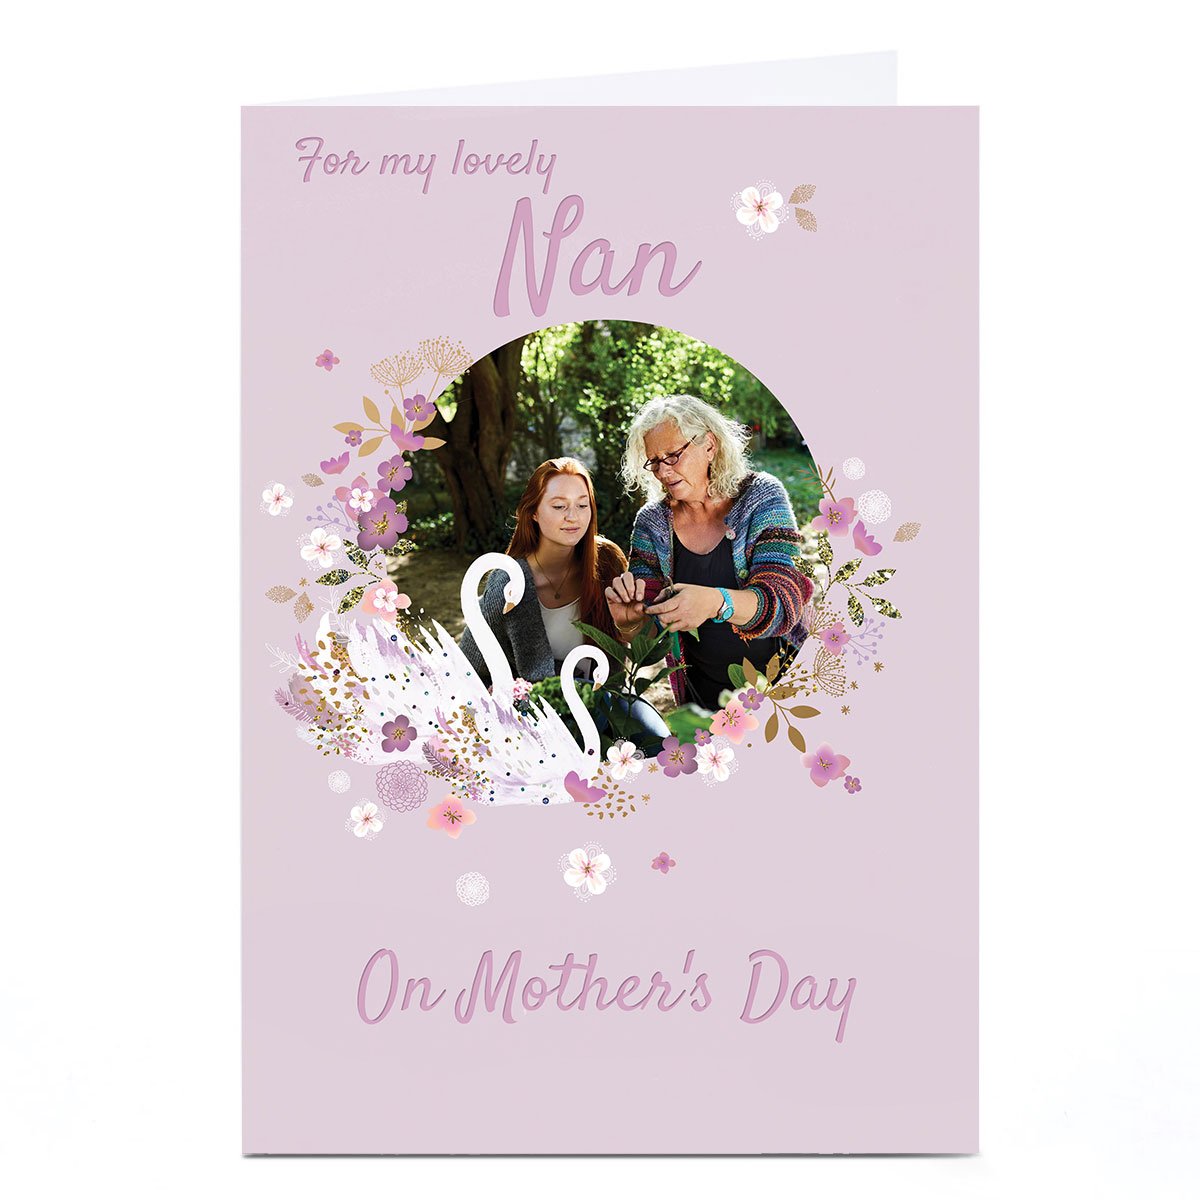 Photo Kerry Spurling Mother's Day Card - Nan, Swans